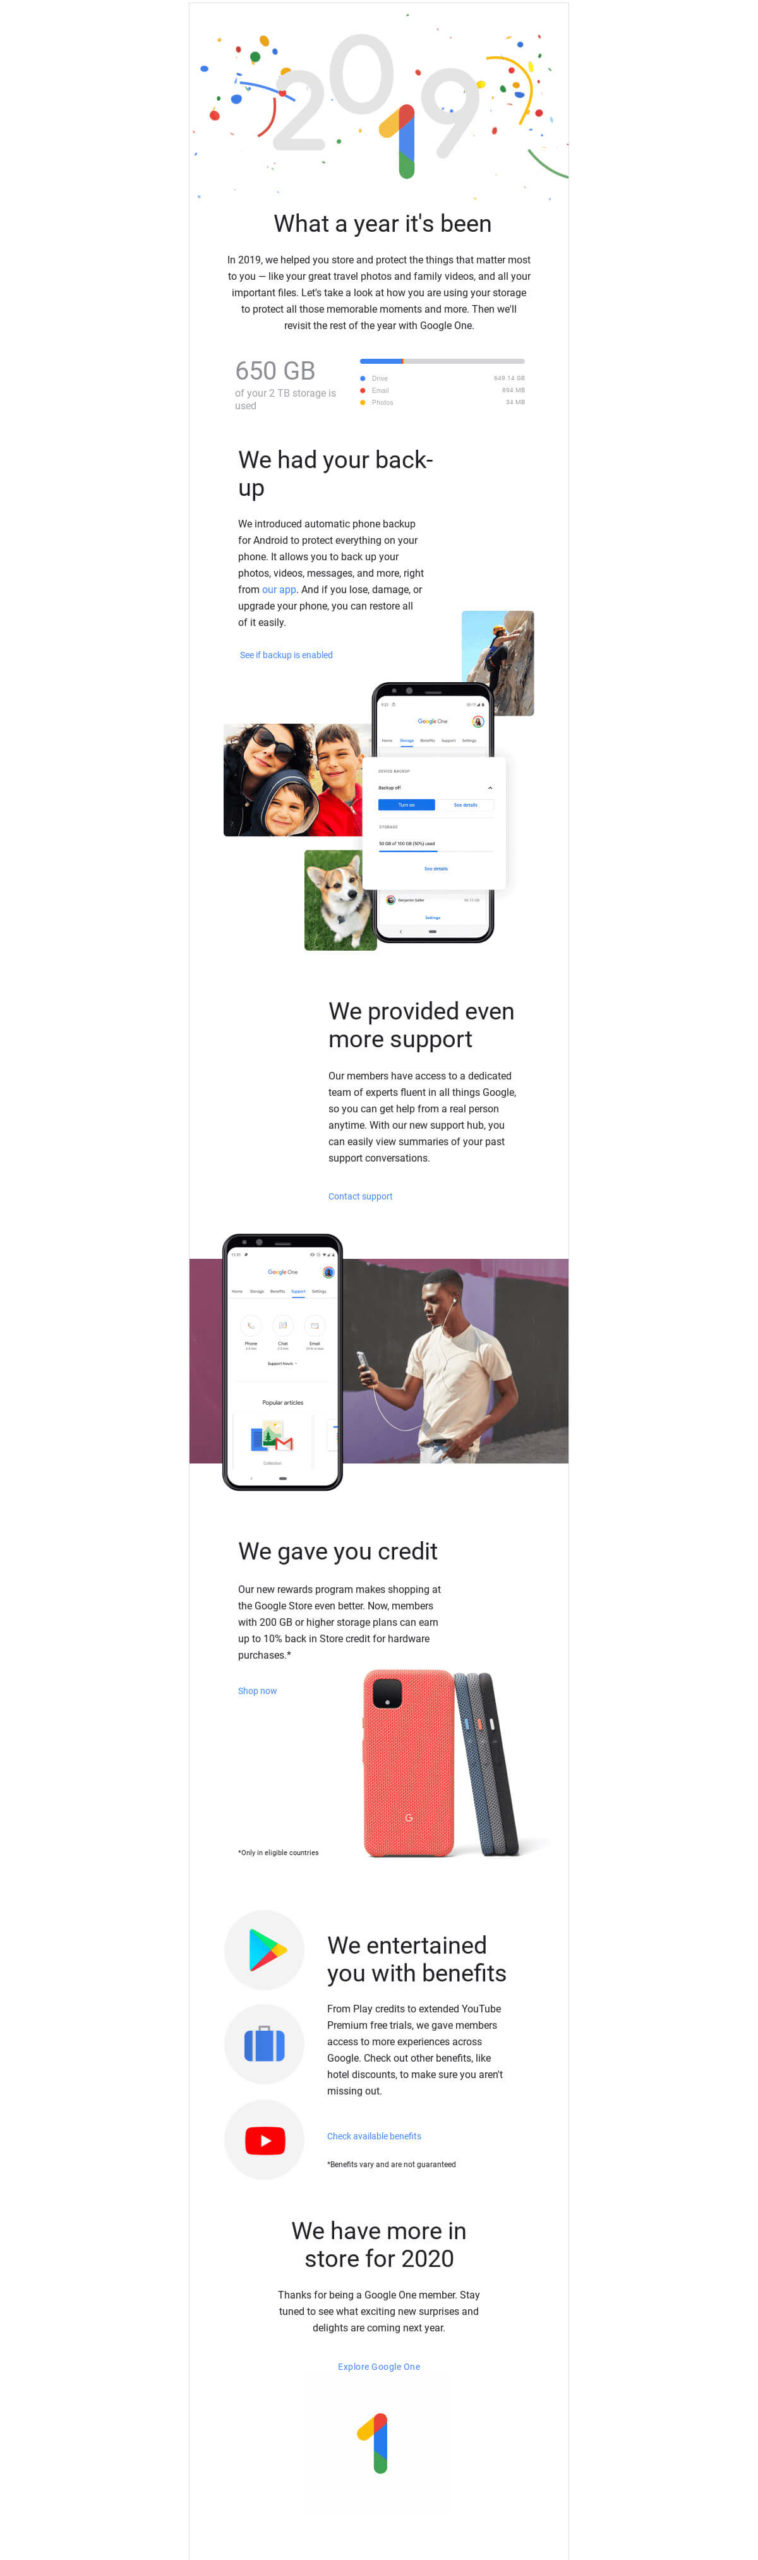 Email by Google celebrating Google One members